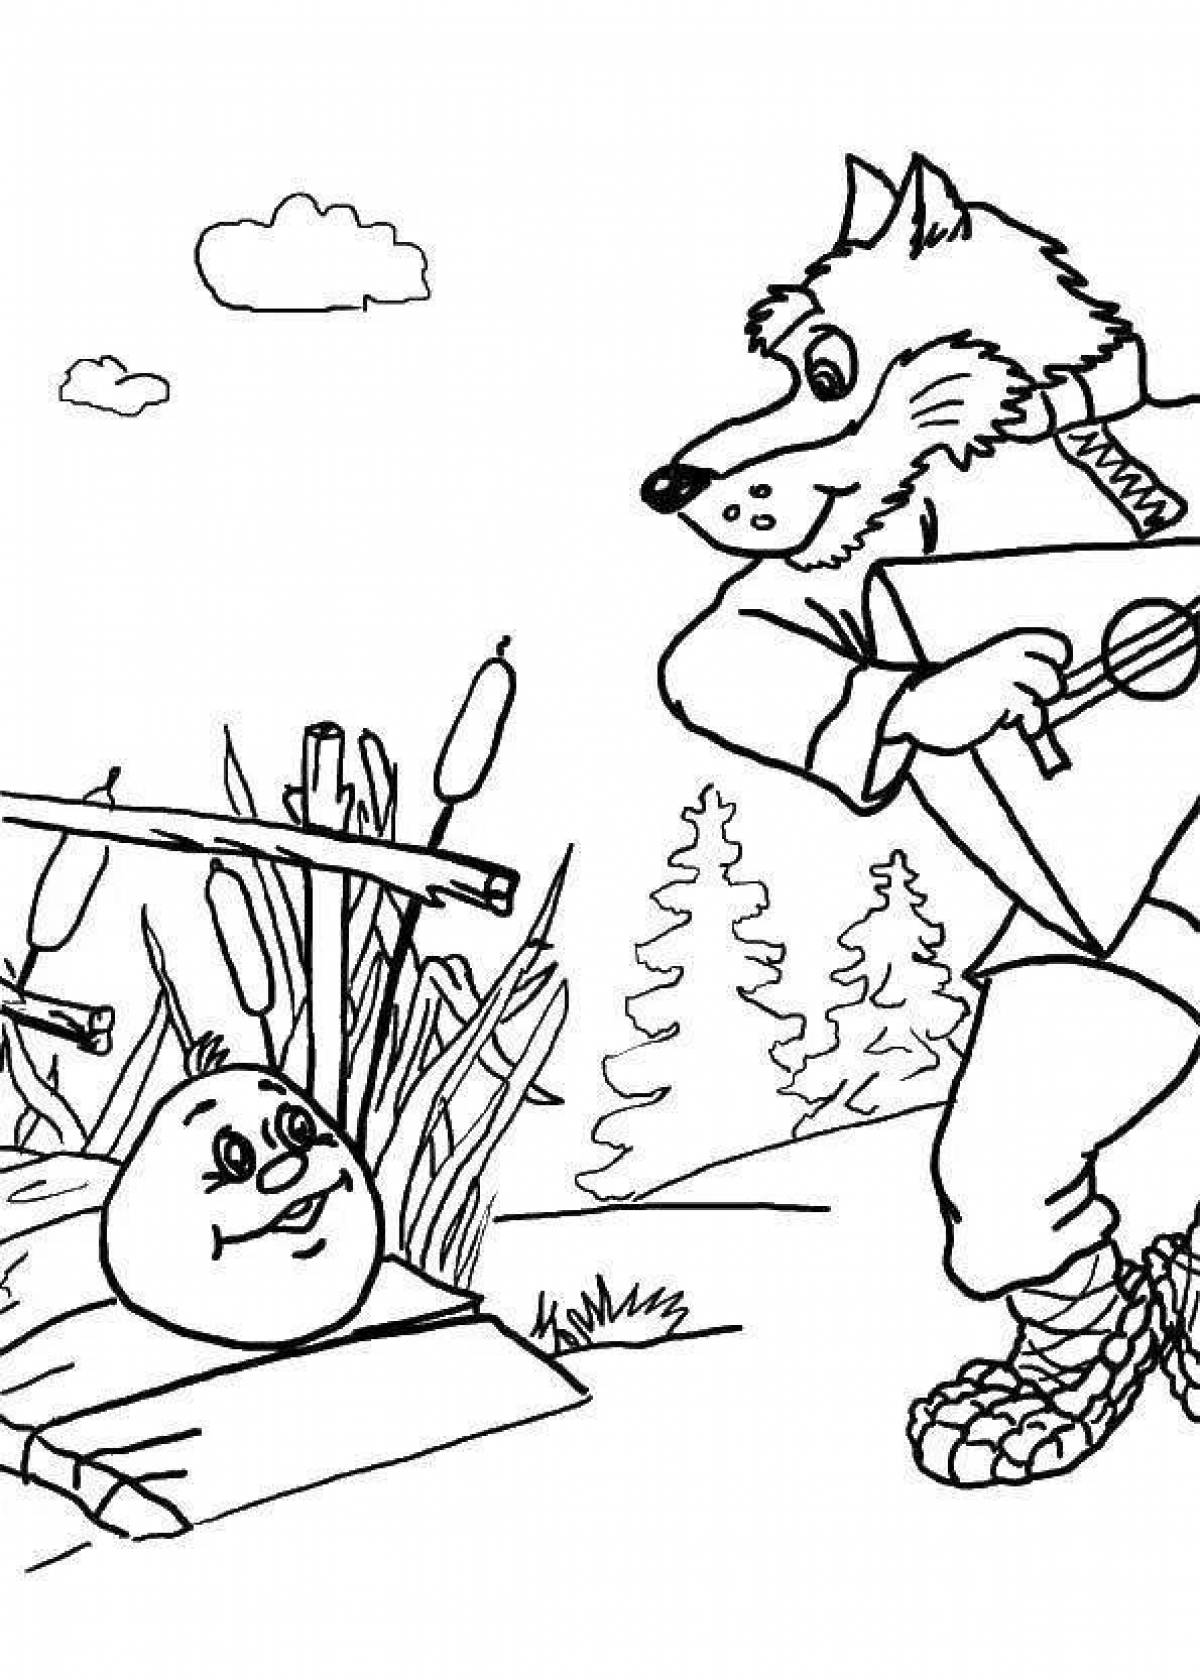 Fairy wolf playful coloring page